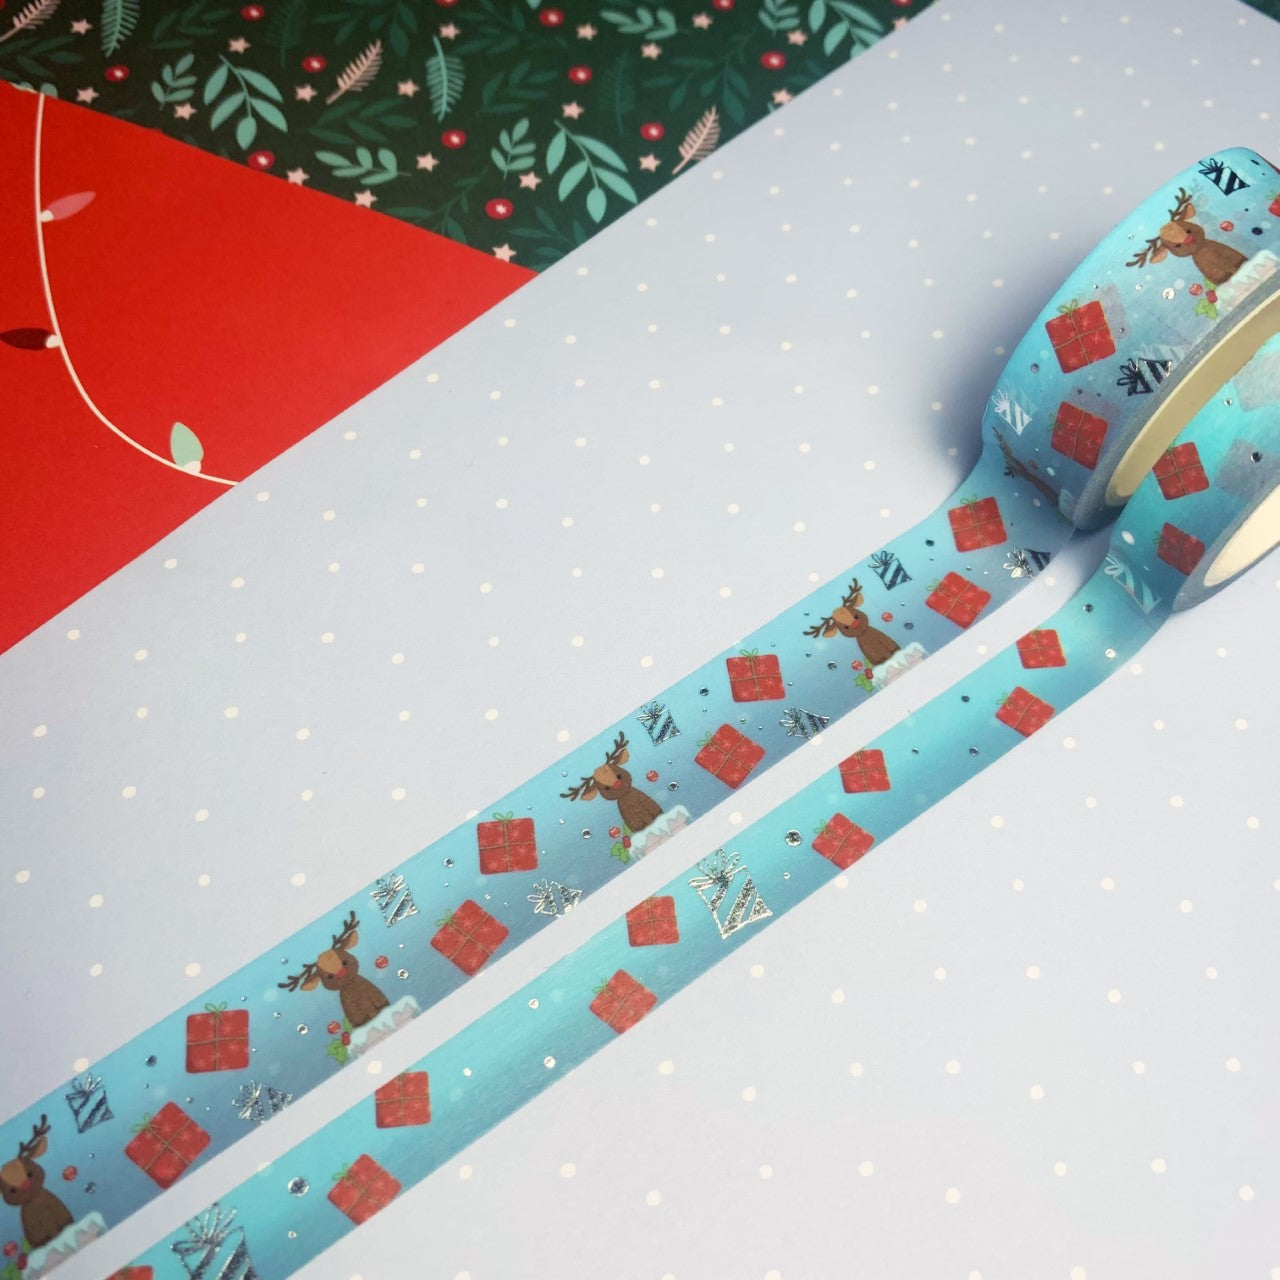 Reindeer on the chimney - Silver Foiled Washi Tape